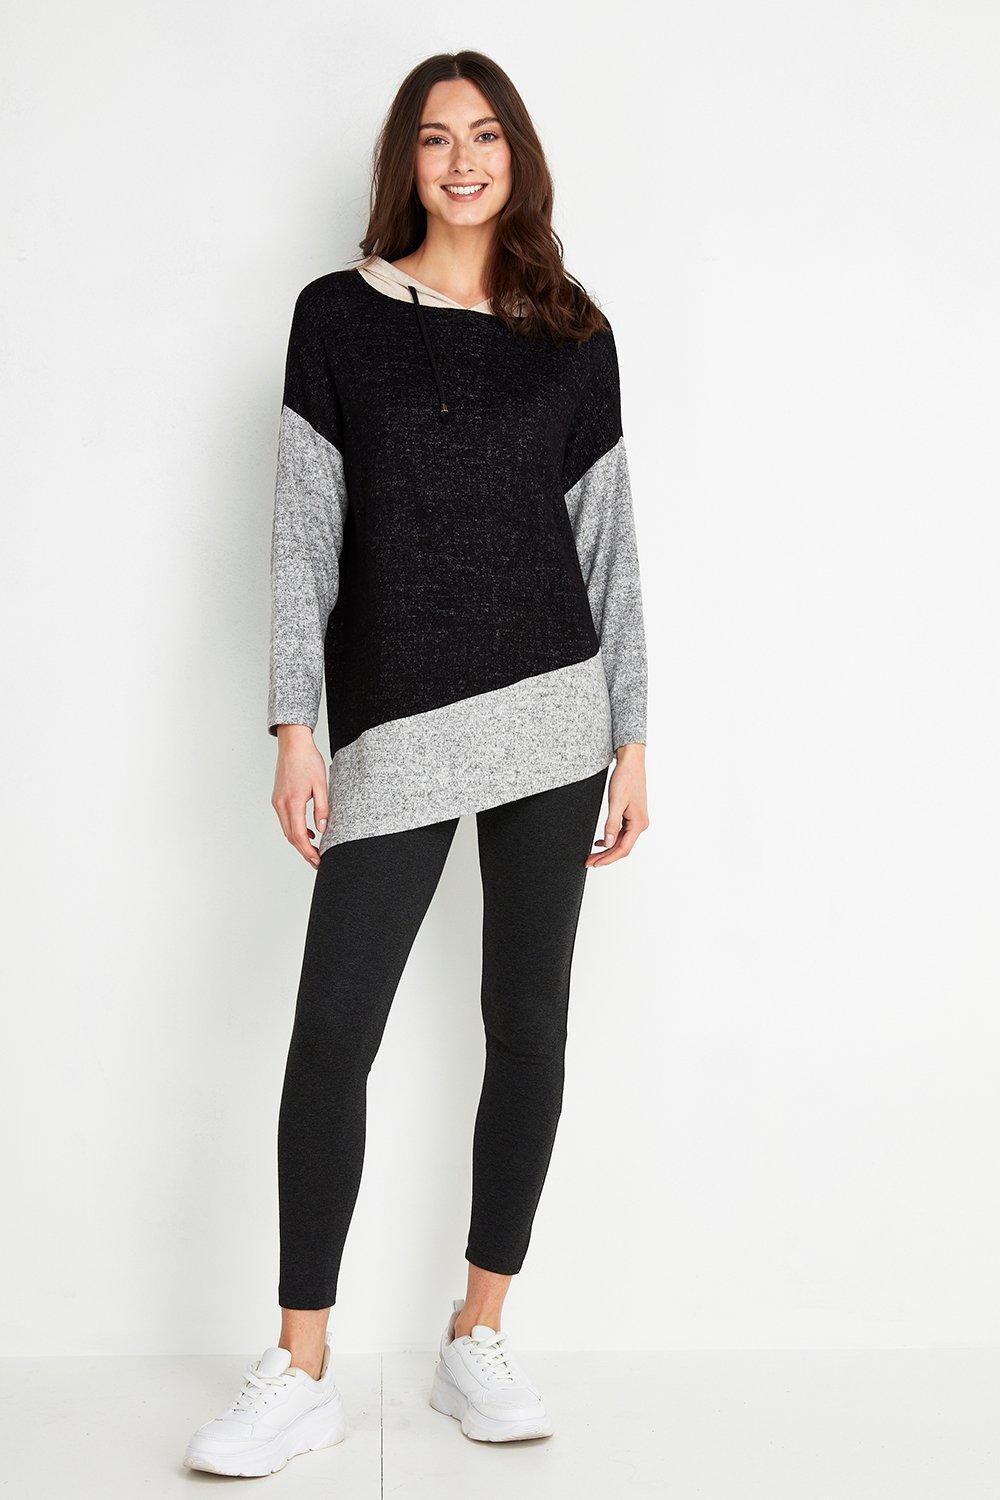 Refresh Your Wardrobe Staples With These Versatile Leggings. A Ponte Jersey Fabric Gives These A Luxe Feel, Whilst A Dark Grey Hue Keeps Them Easy To Pair. Wear With A Relaxed Jumper And White Trainers For Easy Off-Duty Style.  Leggings Fitted Casual 73%